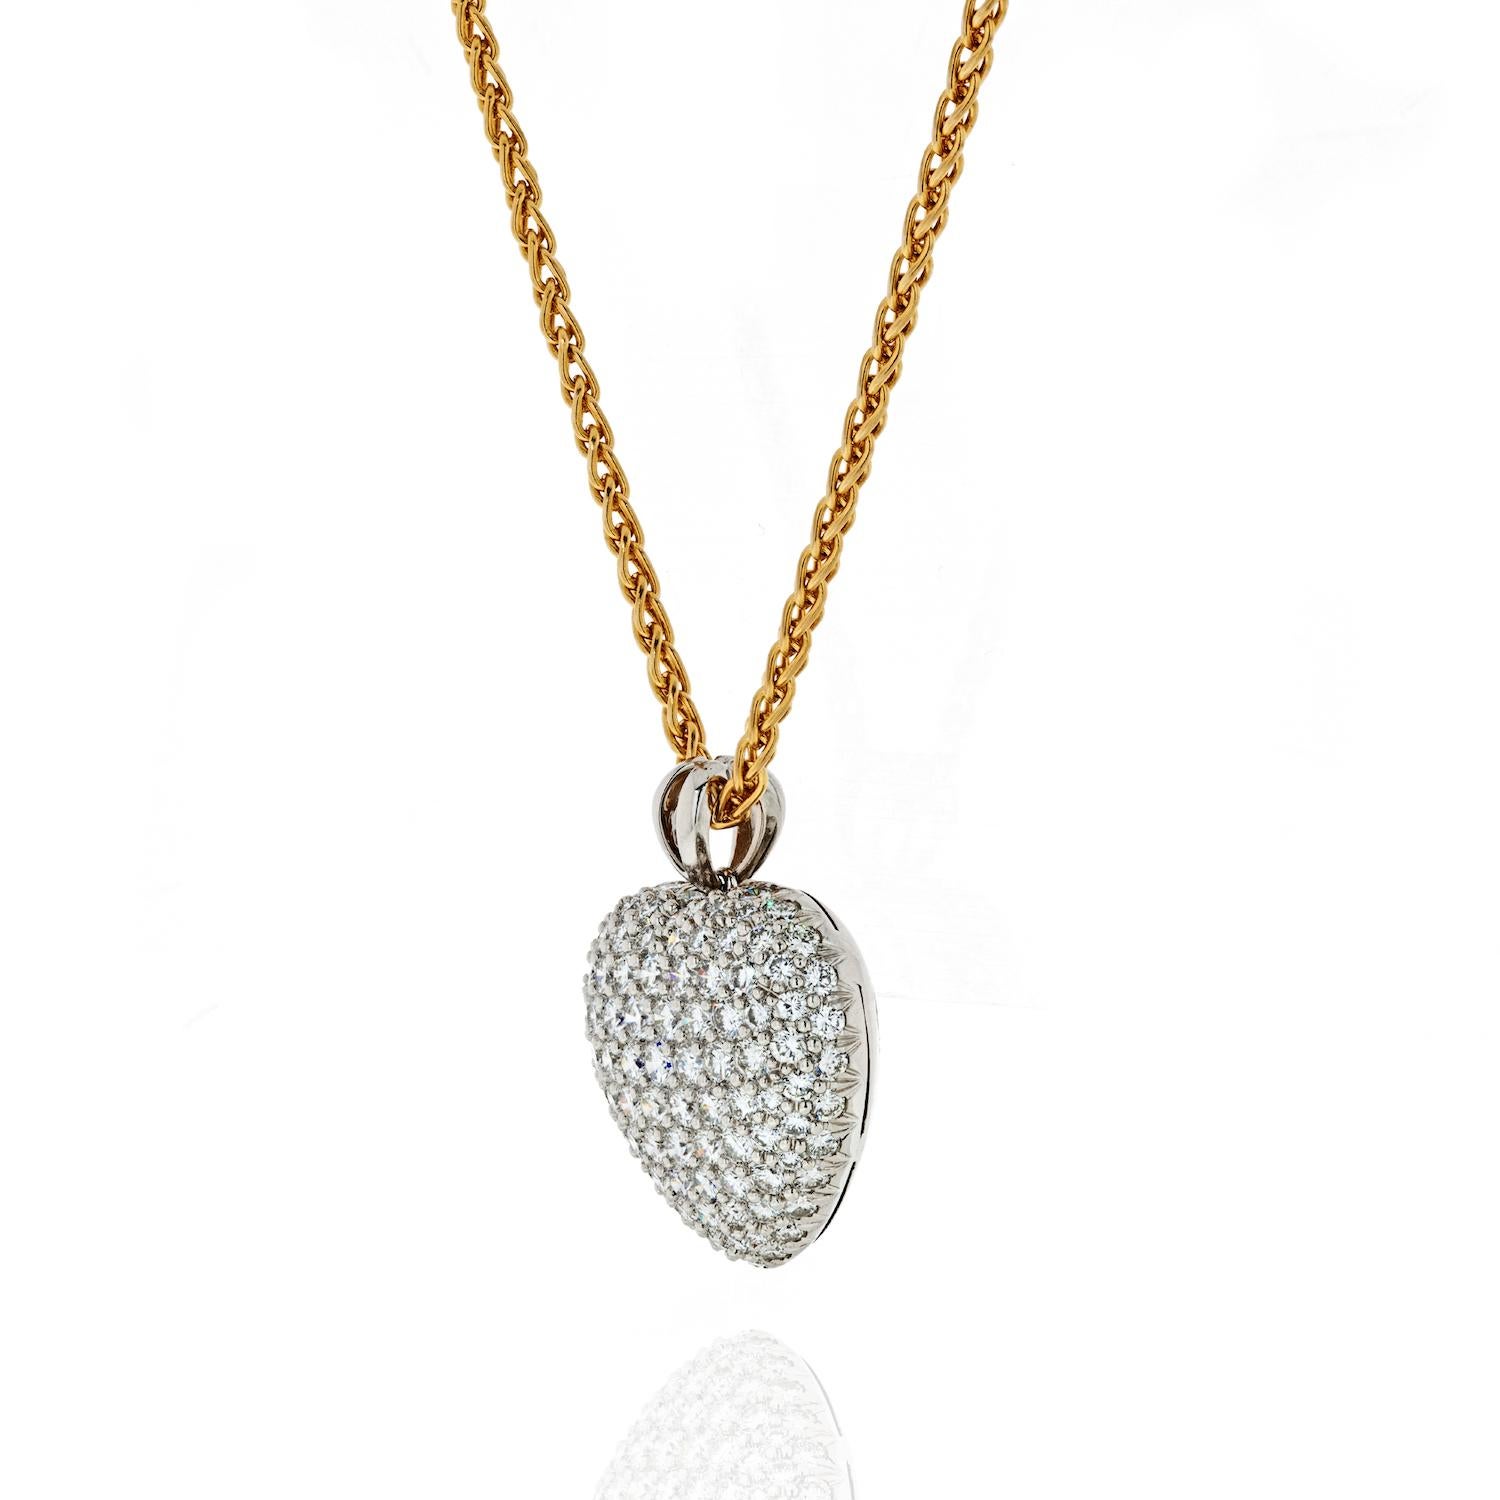 Platinum pave diamond heart pendant by Kurt Wayne. This diamond heart is of an exceptional quality encrusted with round brilliant cut diamonds of 5.50 carats total weight. 

Chain drops to about 21 inches. making this necklace a cool option for